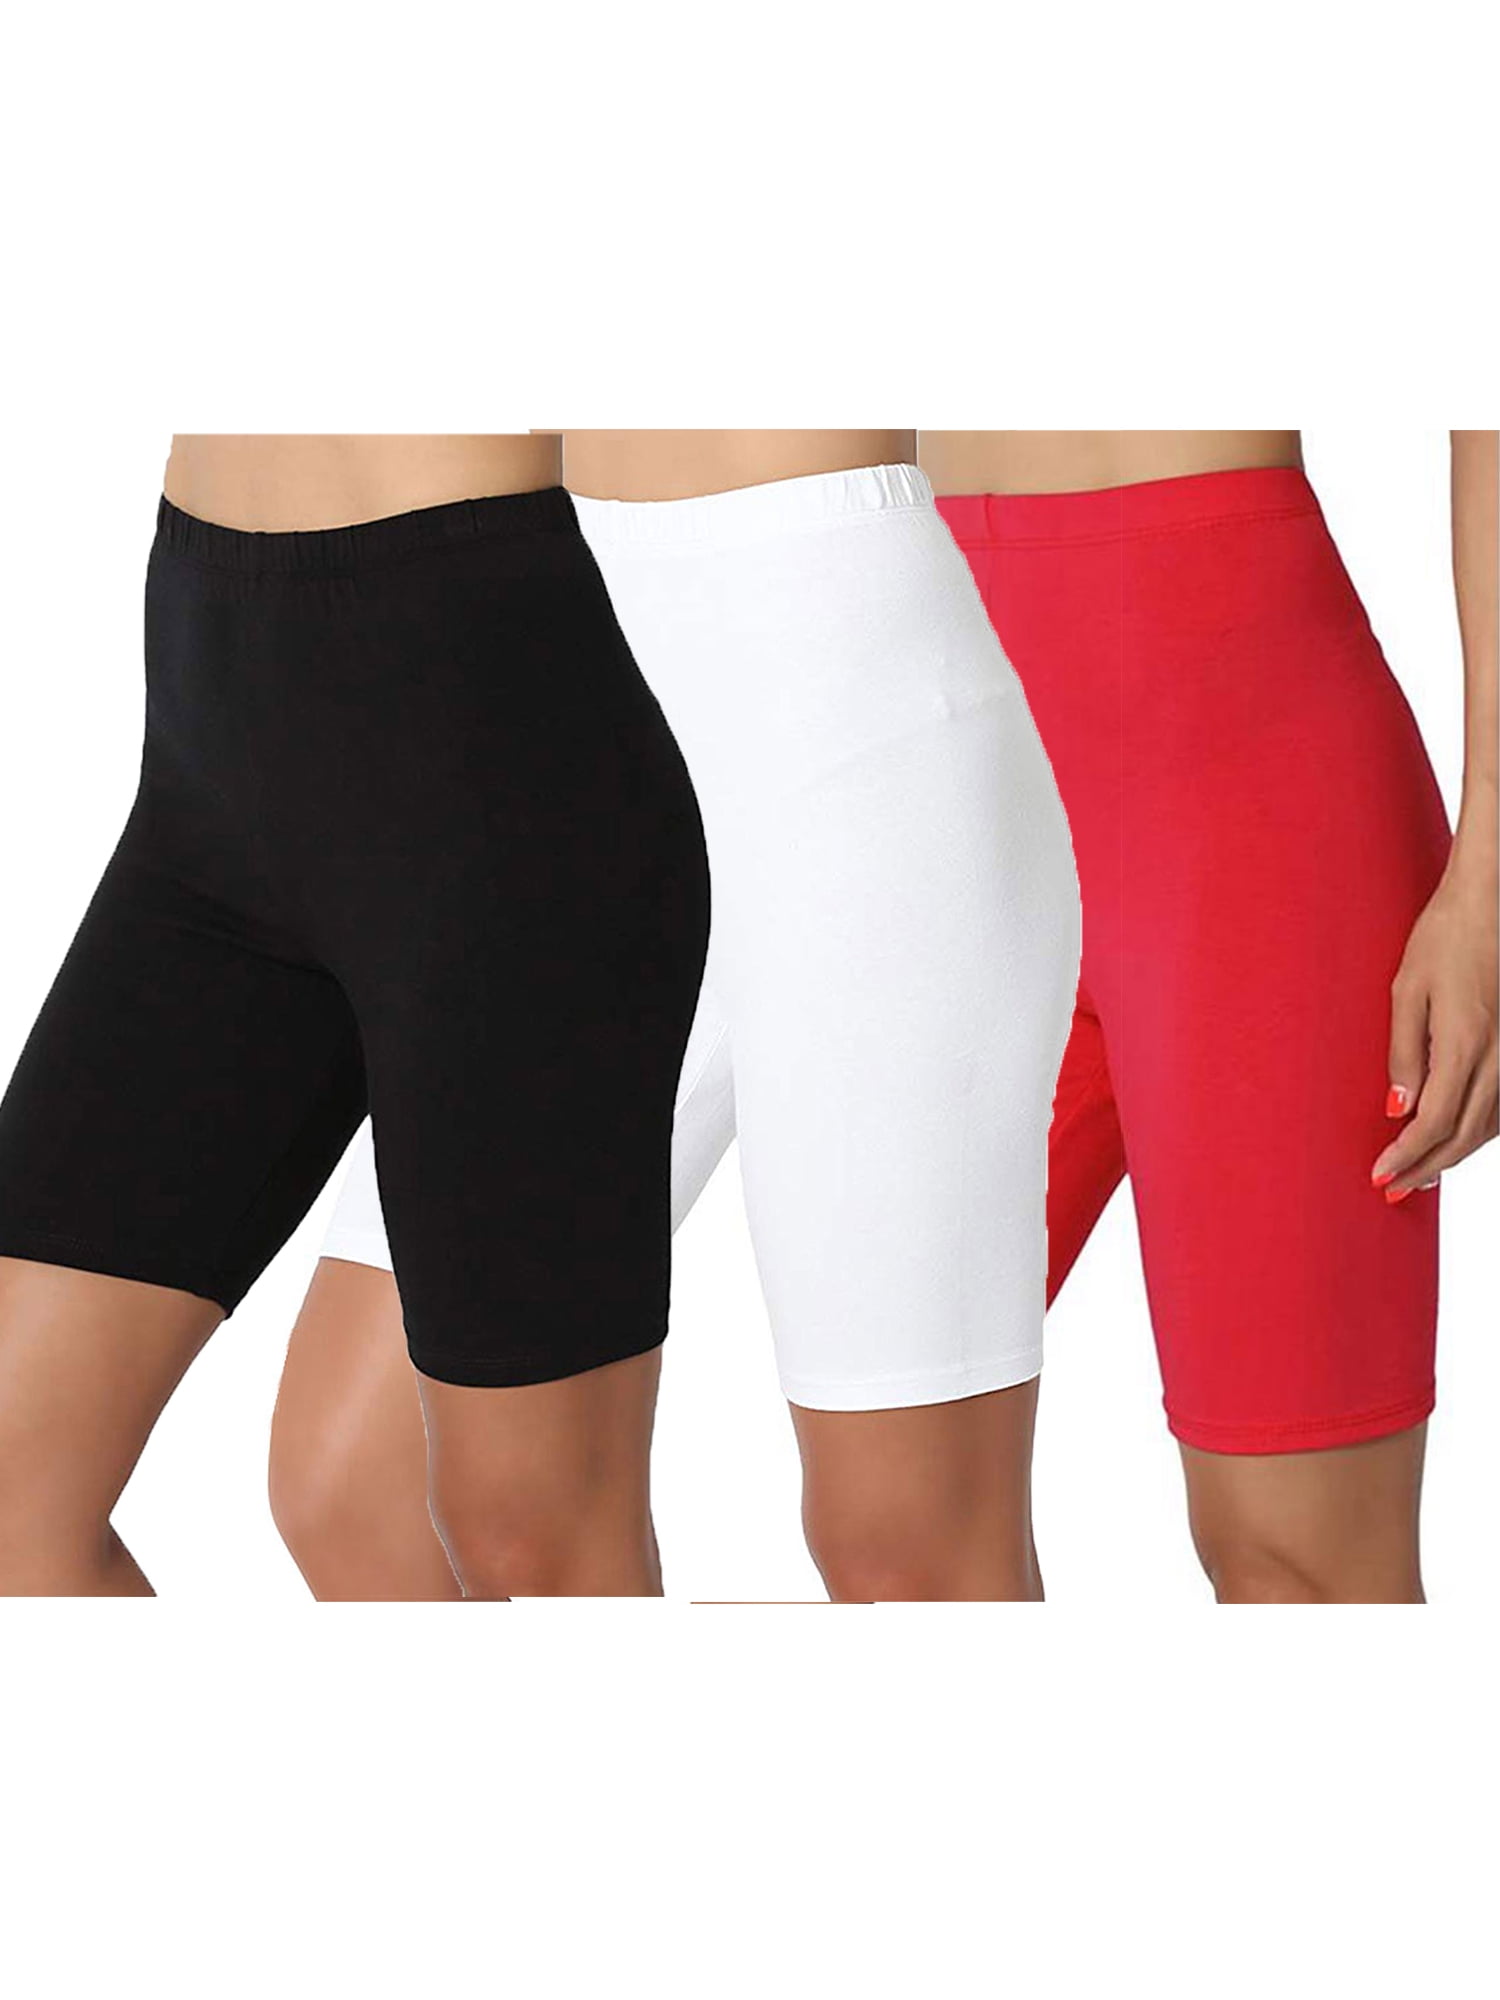 Ladies Cotton Active Sports Cycling Shorts Leggings Dance Over Knee Stretchy UK 